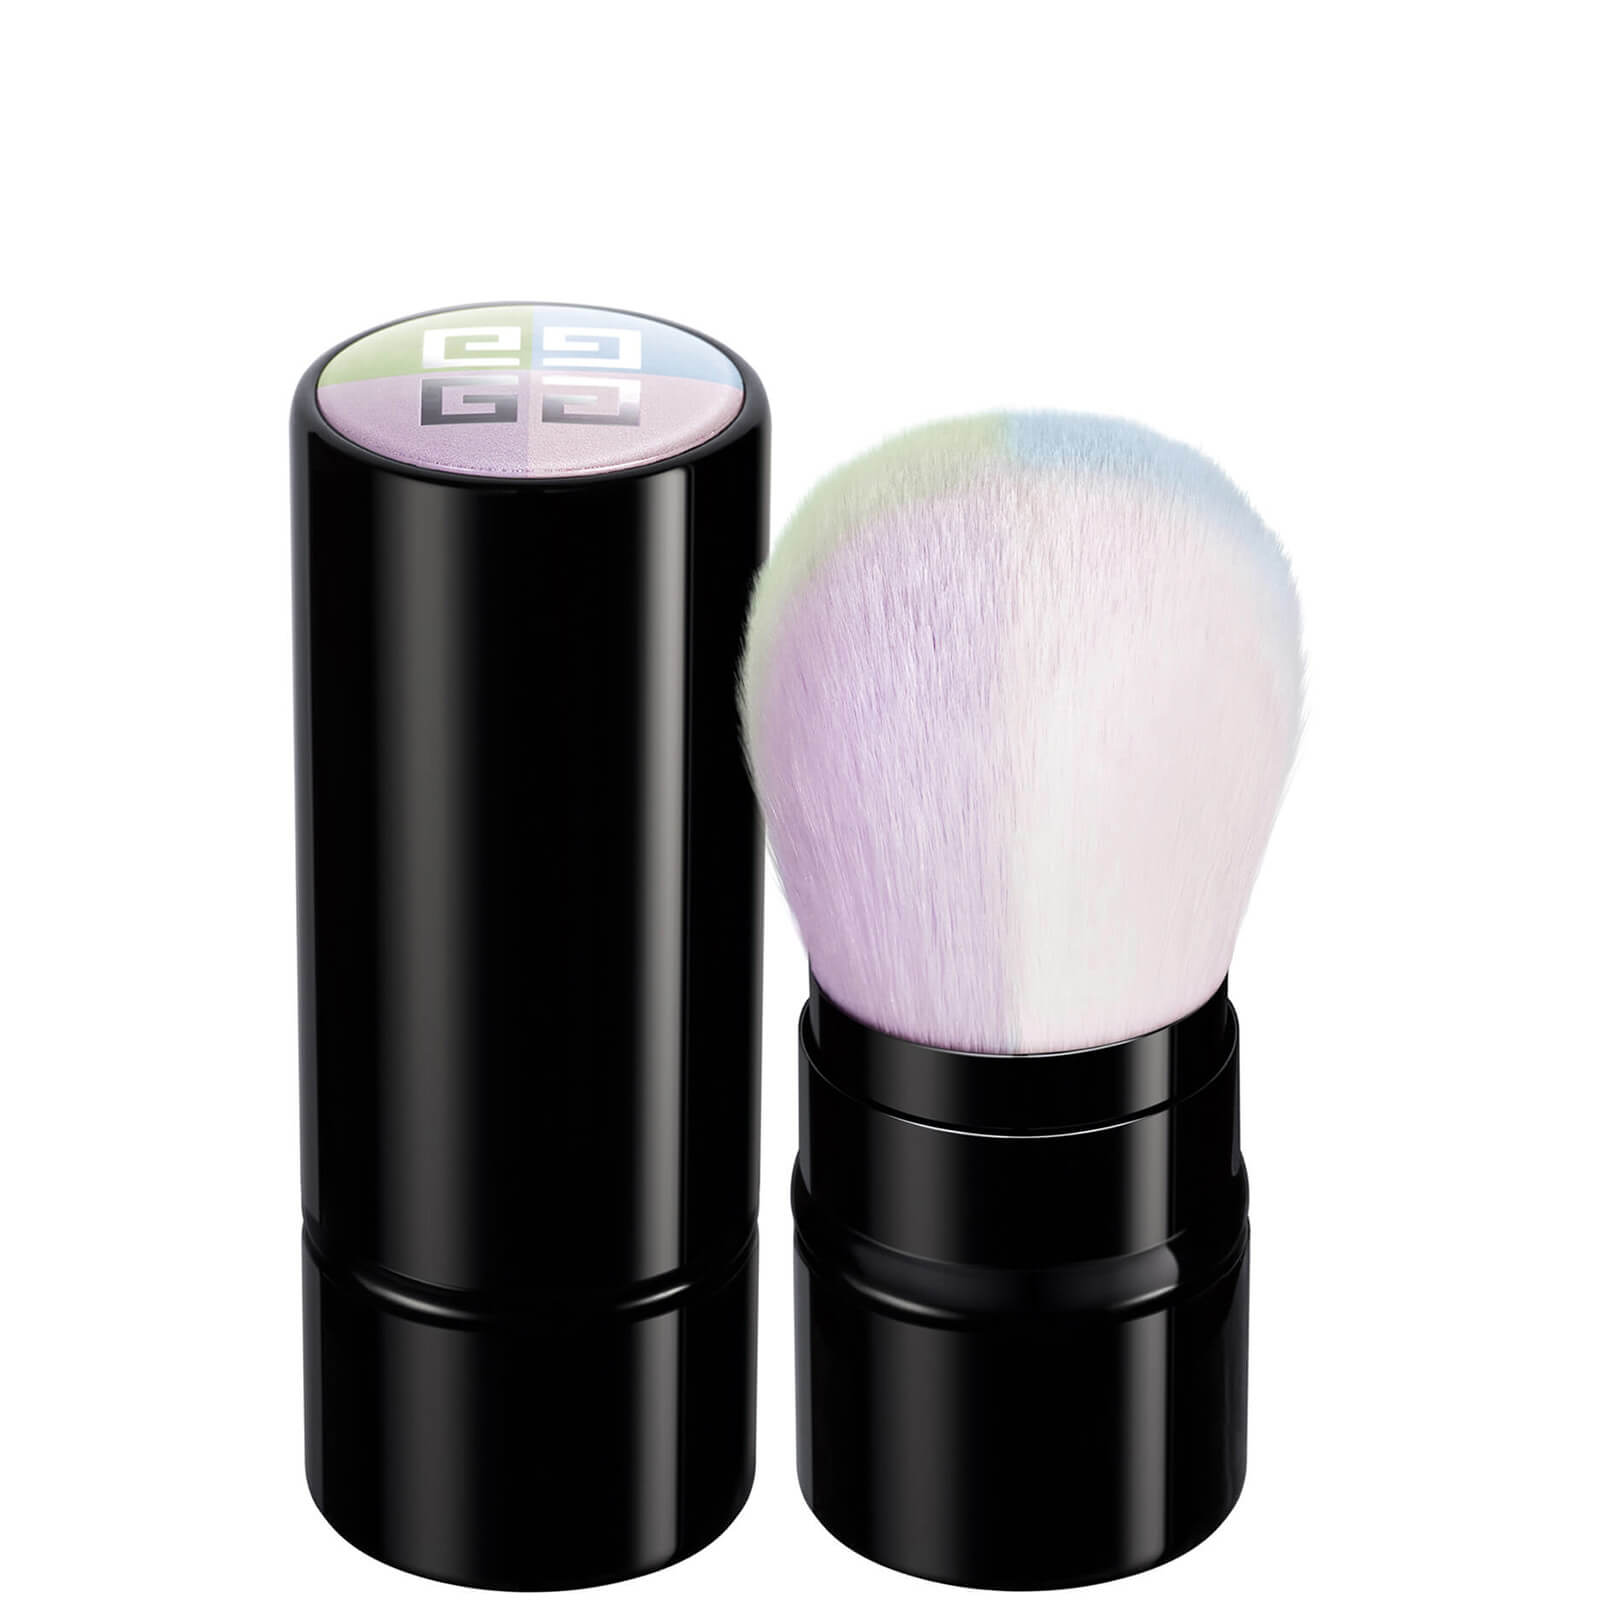  Givenchy Prisme Libre On-the-Go Brush